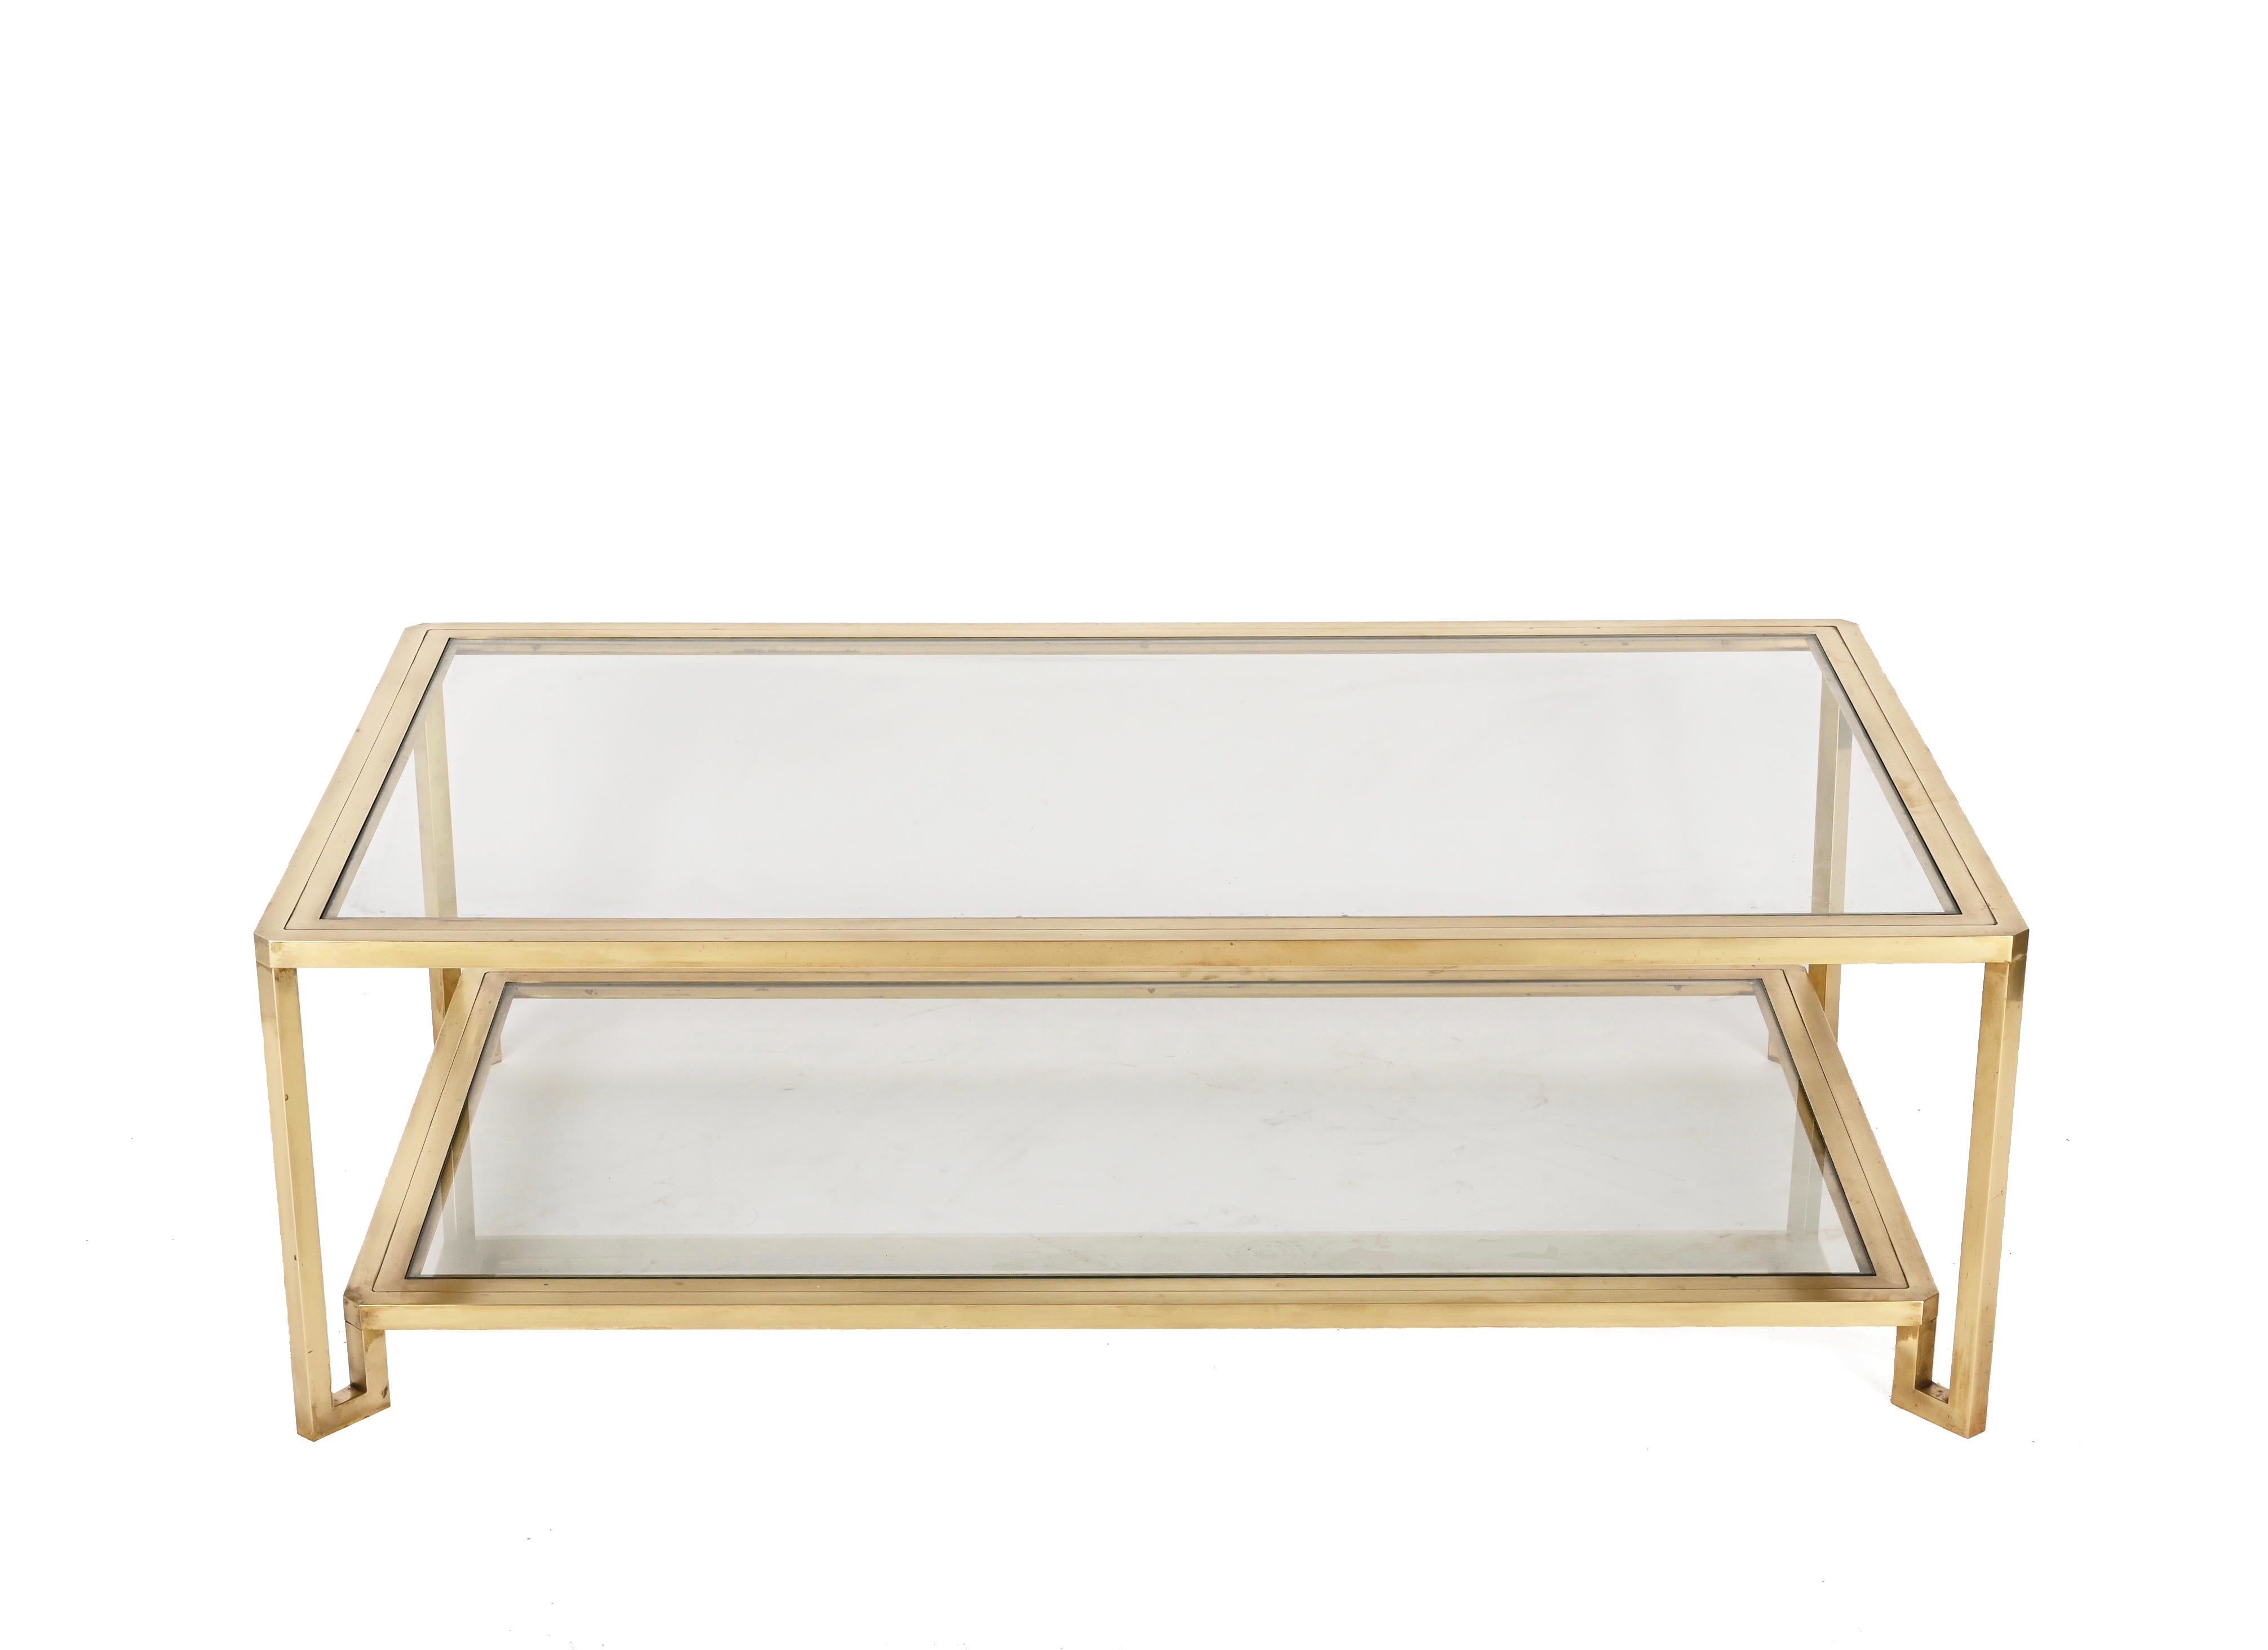 Unique midcentury modern rectangular coffee table with a brass structure and two tiers crystal glass tops. This fantastic piece was produced in Italy during the 1970s.

This luxurious item has a rectangular structure composed of a straight-lined